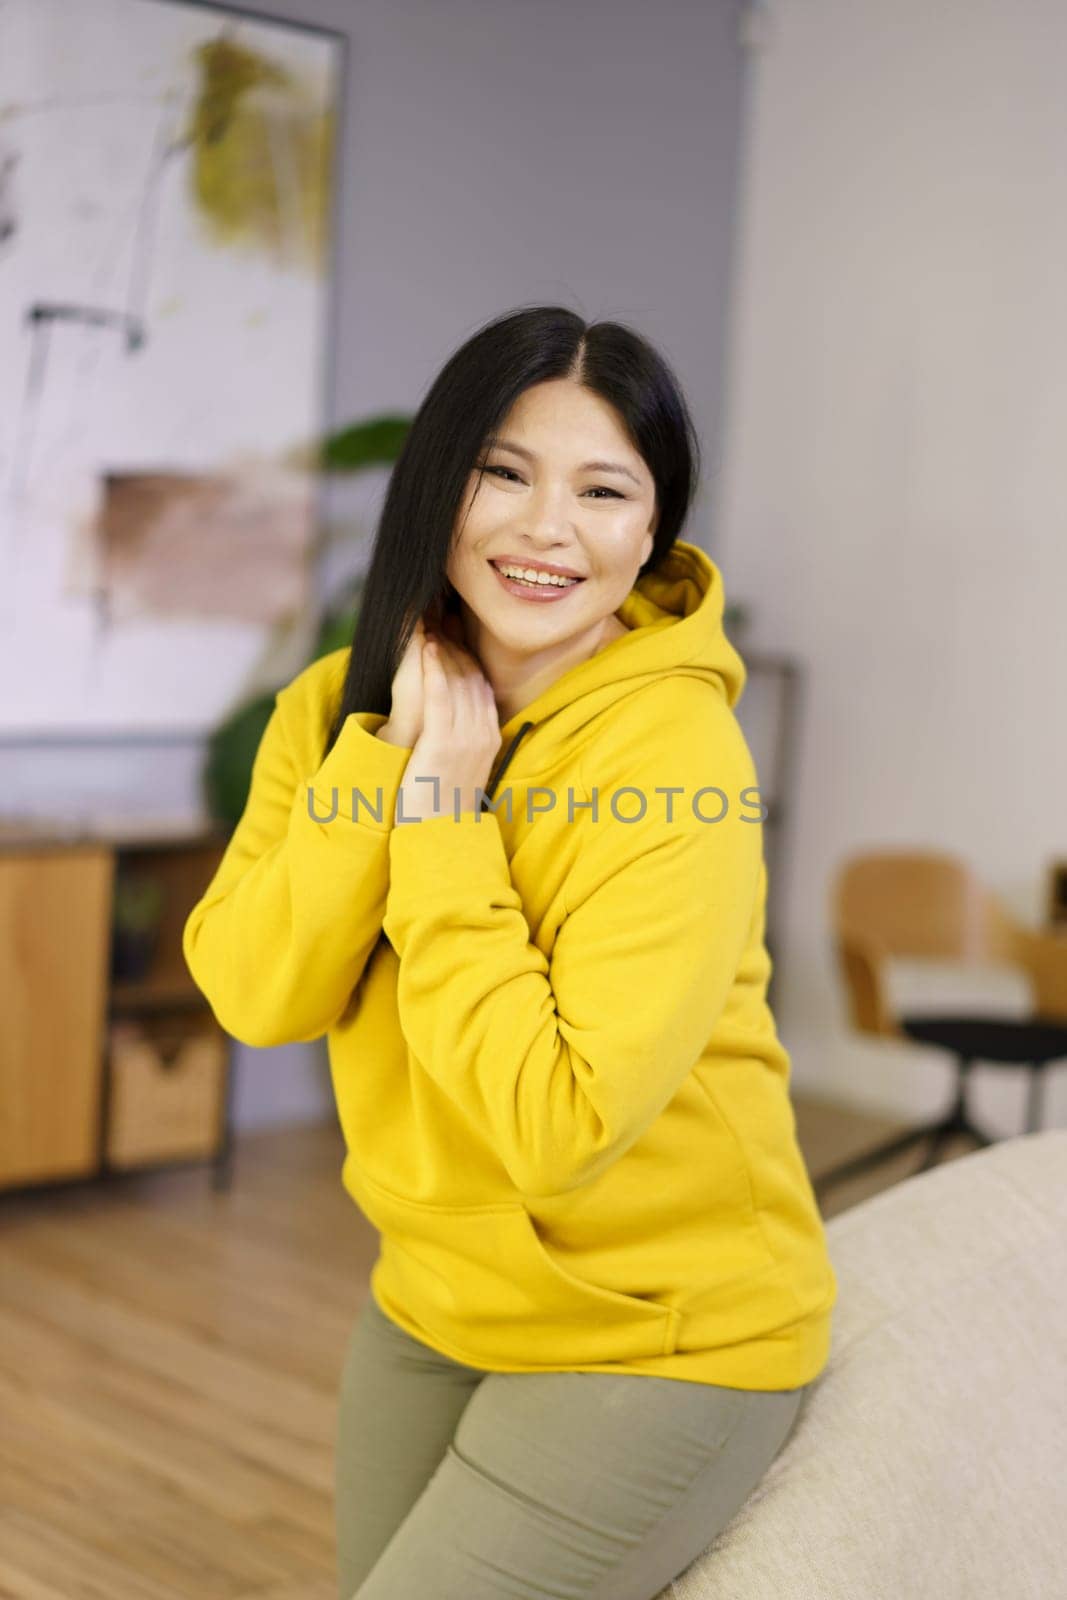 Mature Asian woman is captured in her home, enjoying the happy moments of life through the lens of lifestyle biohacking. She is surrounded by greenery and natural sunlight, as she focuses on wellness, fitness, and mental health. High quality photo